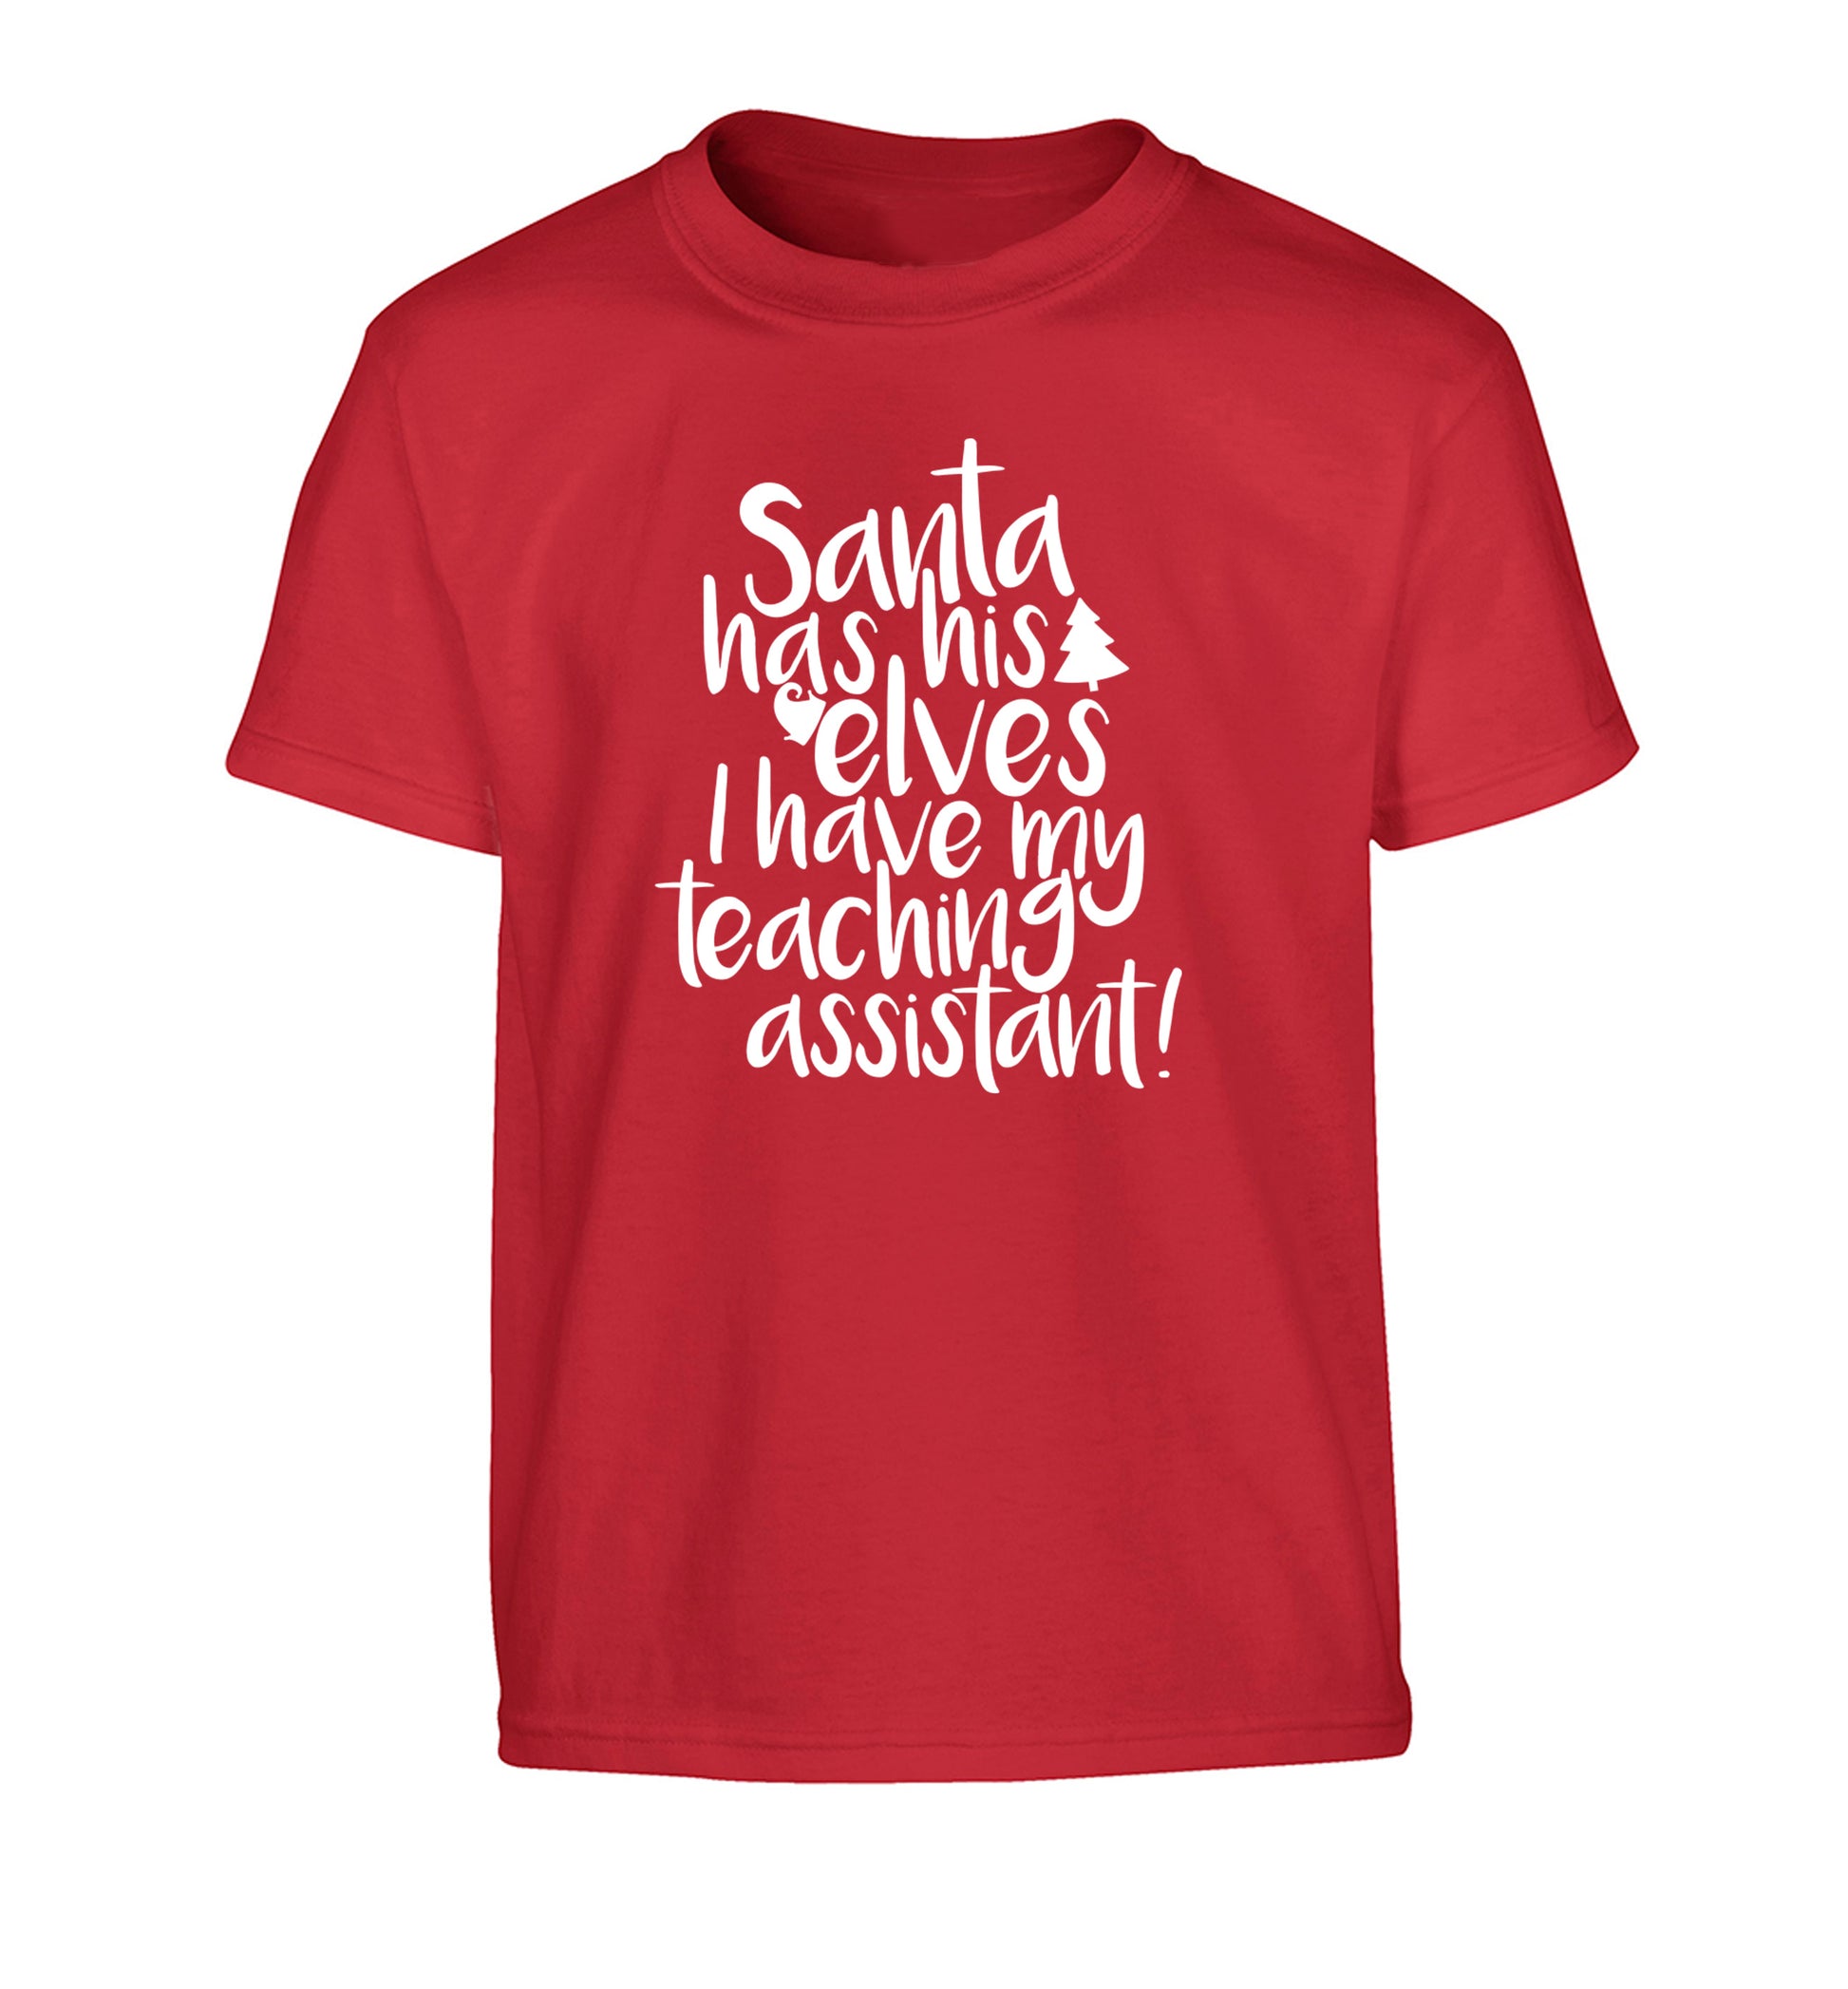 Santa has his elves I have my teaching assistant Children's red Tshirt 12-14 Years